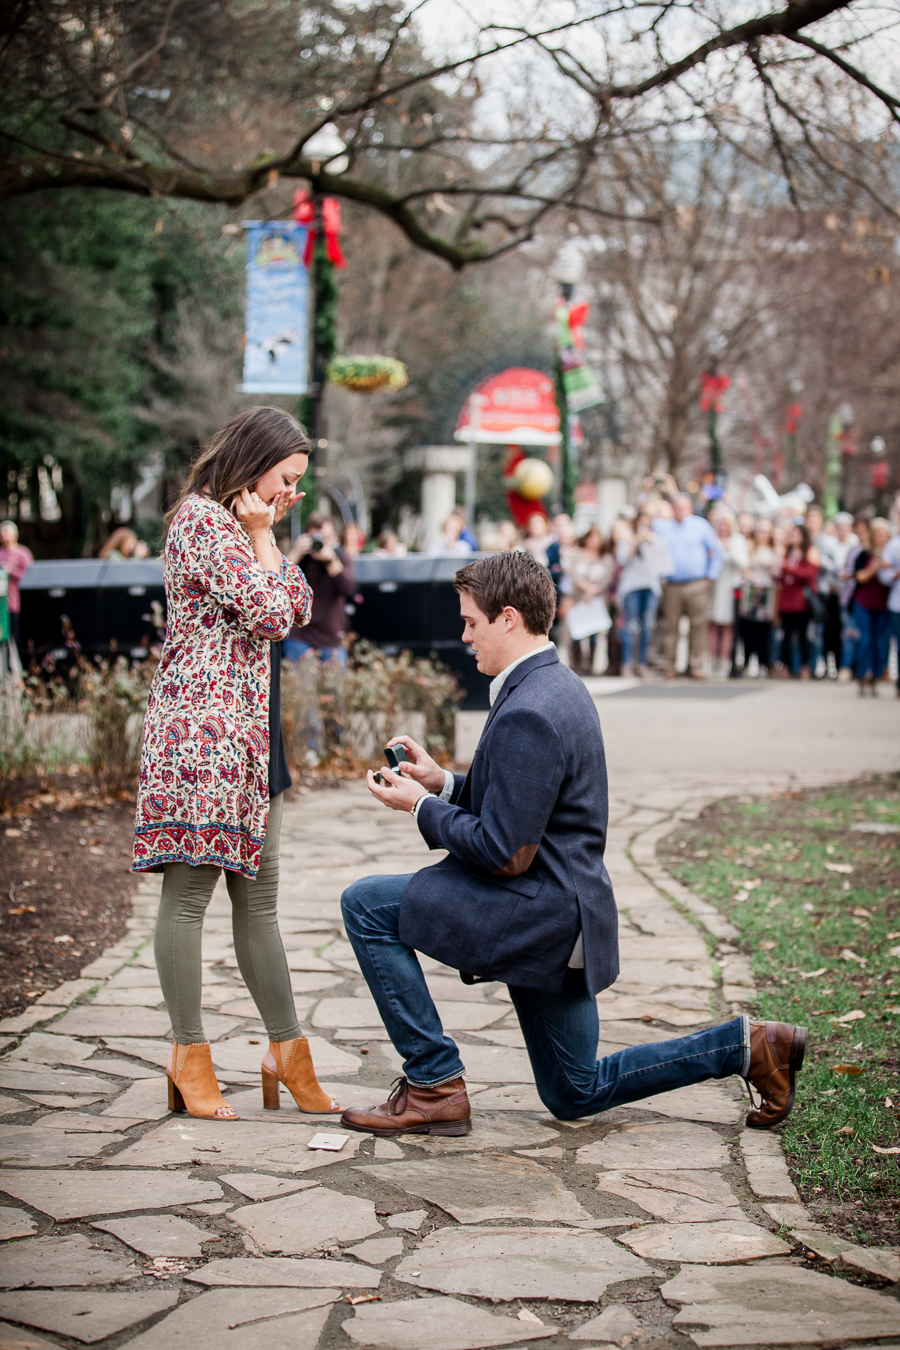 On one knee in market square engagement photo by Knoxville Wedding Photographer, Amanda May Photos.